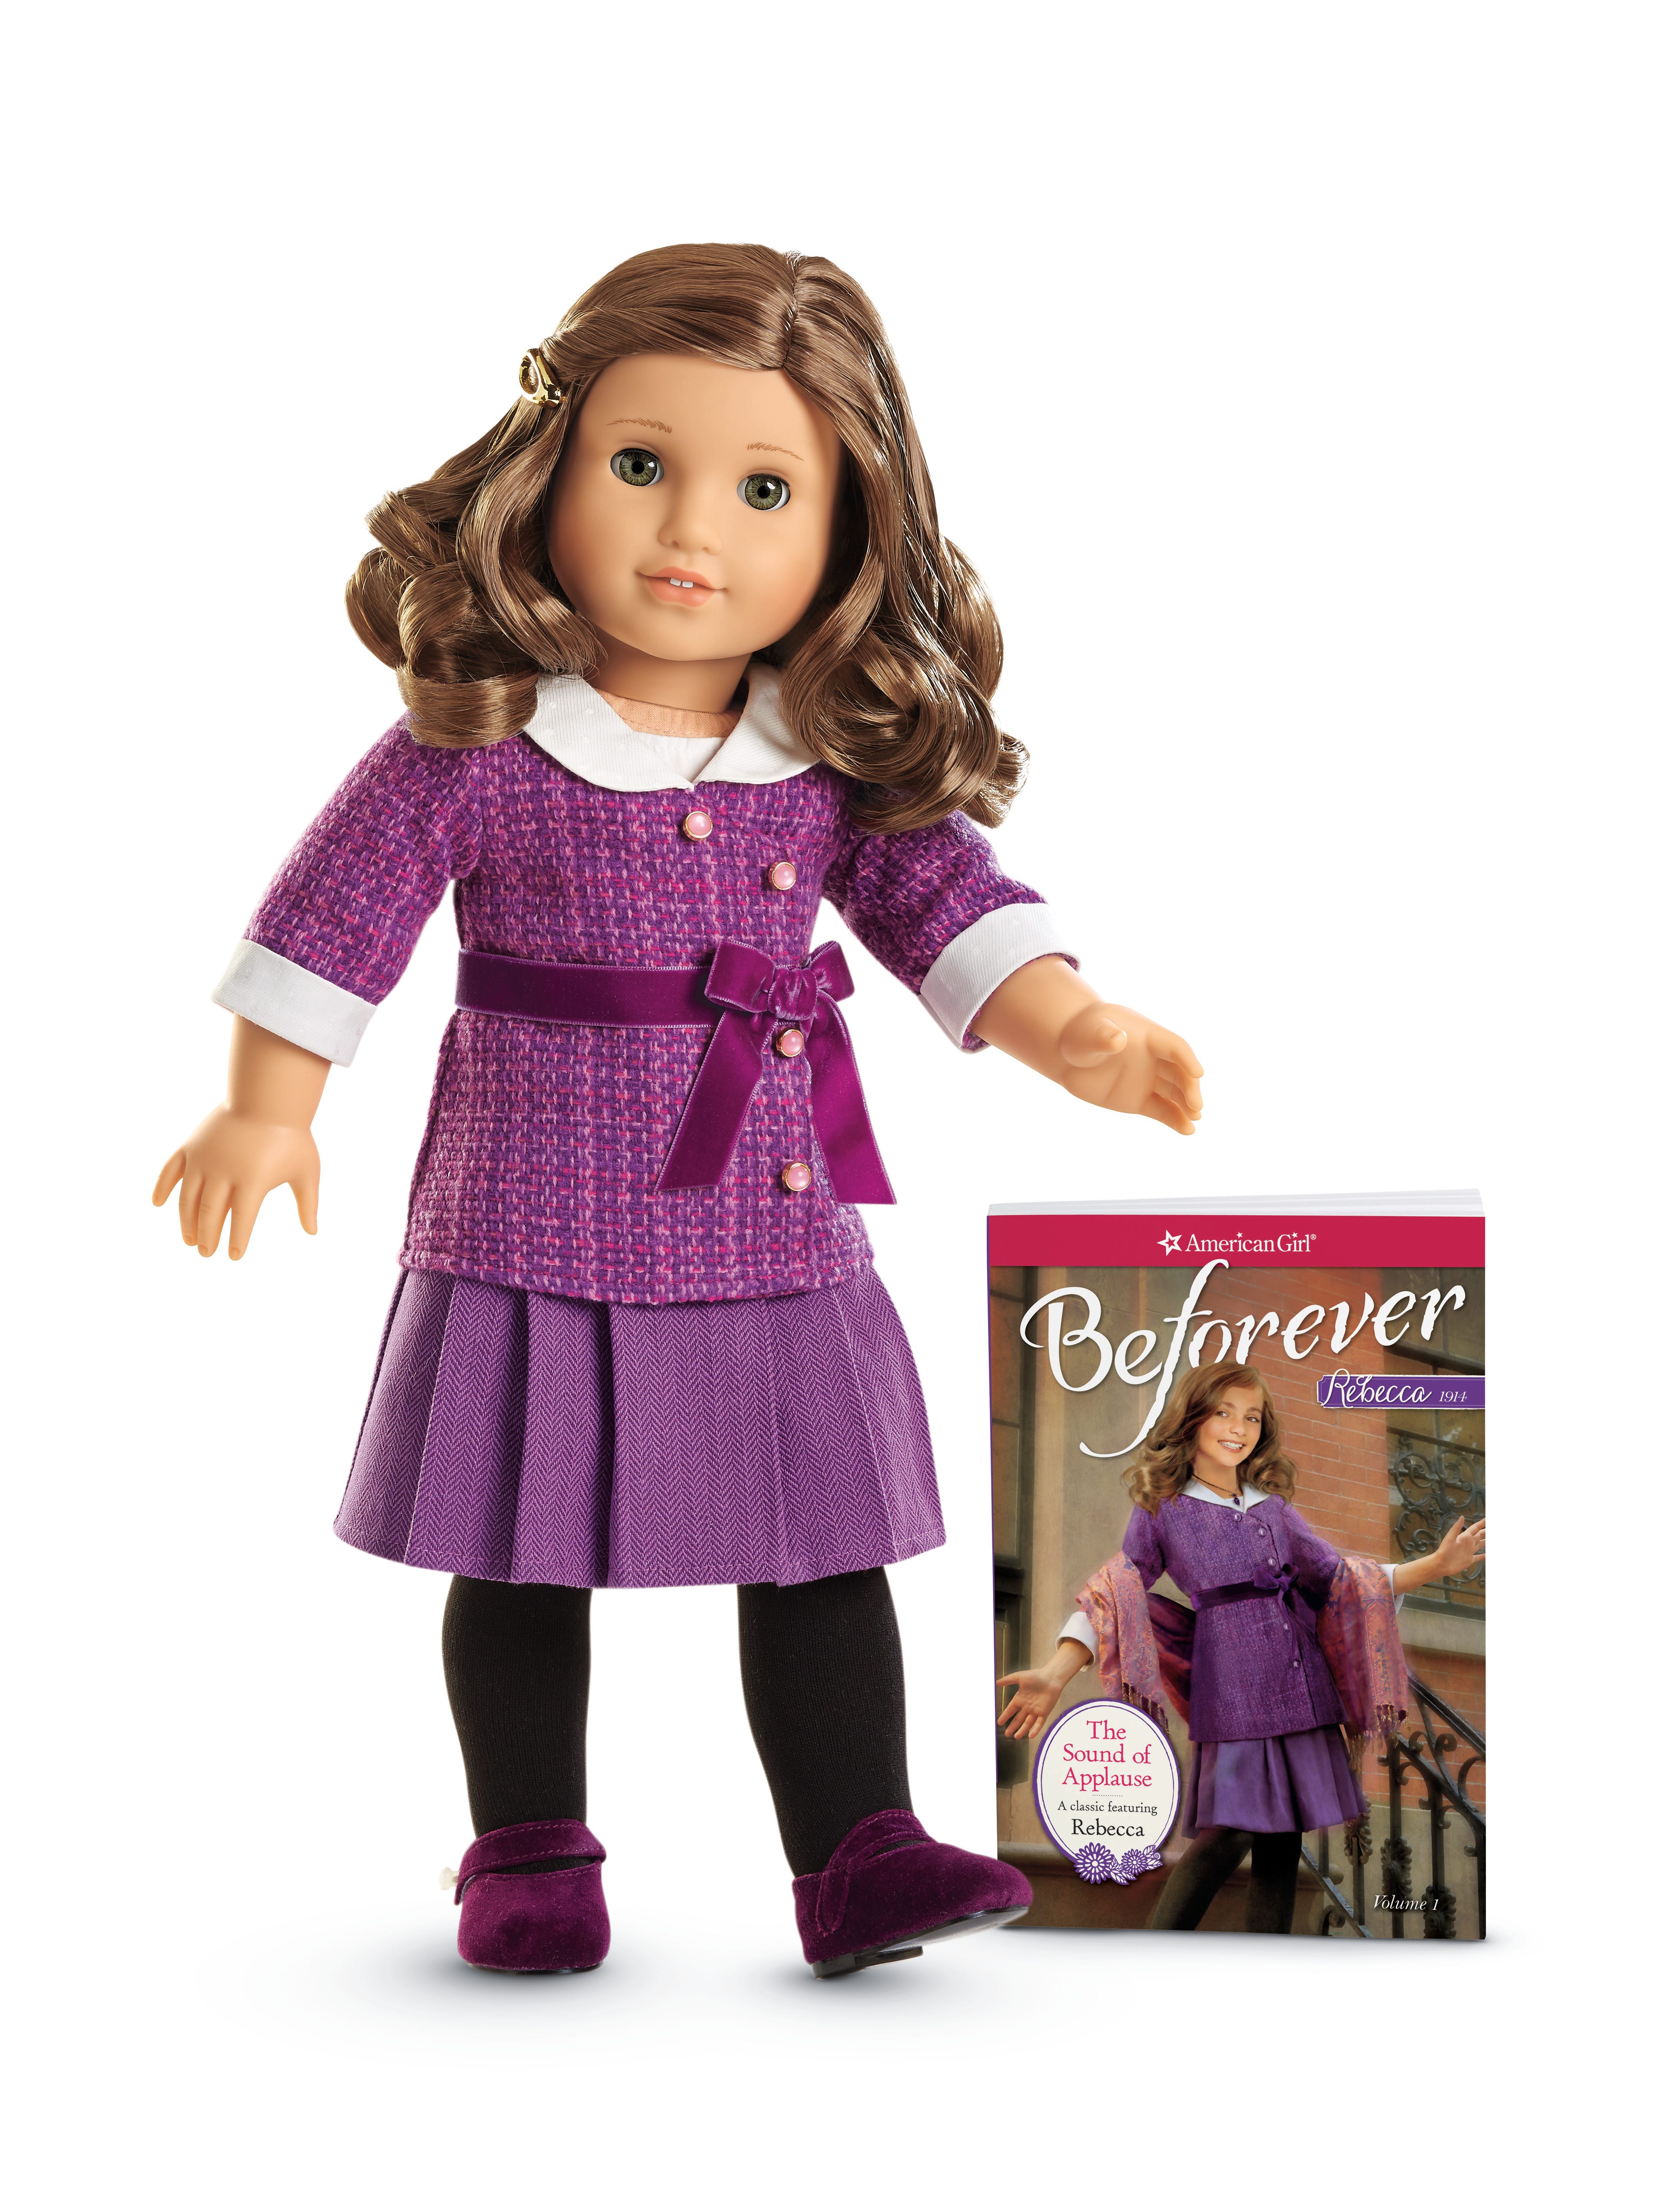 What Are All The American Girl Dolls Names And Pictures